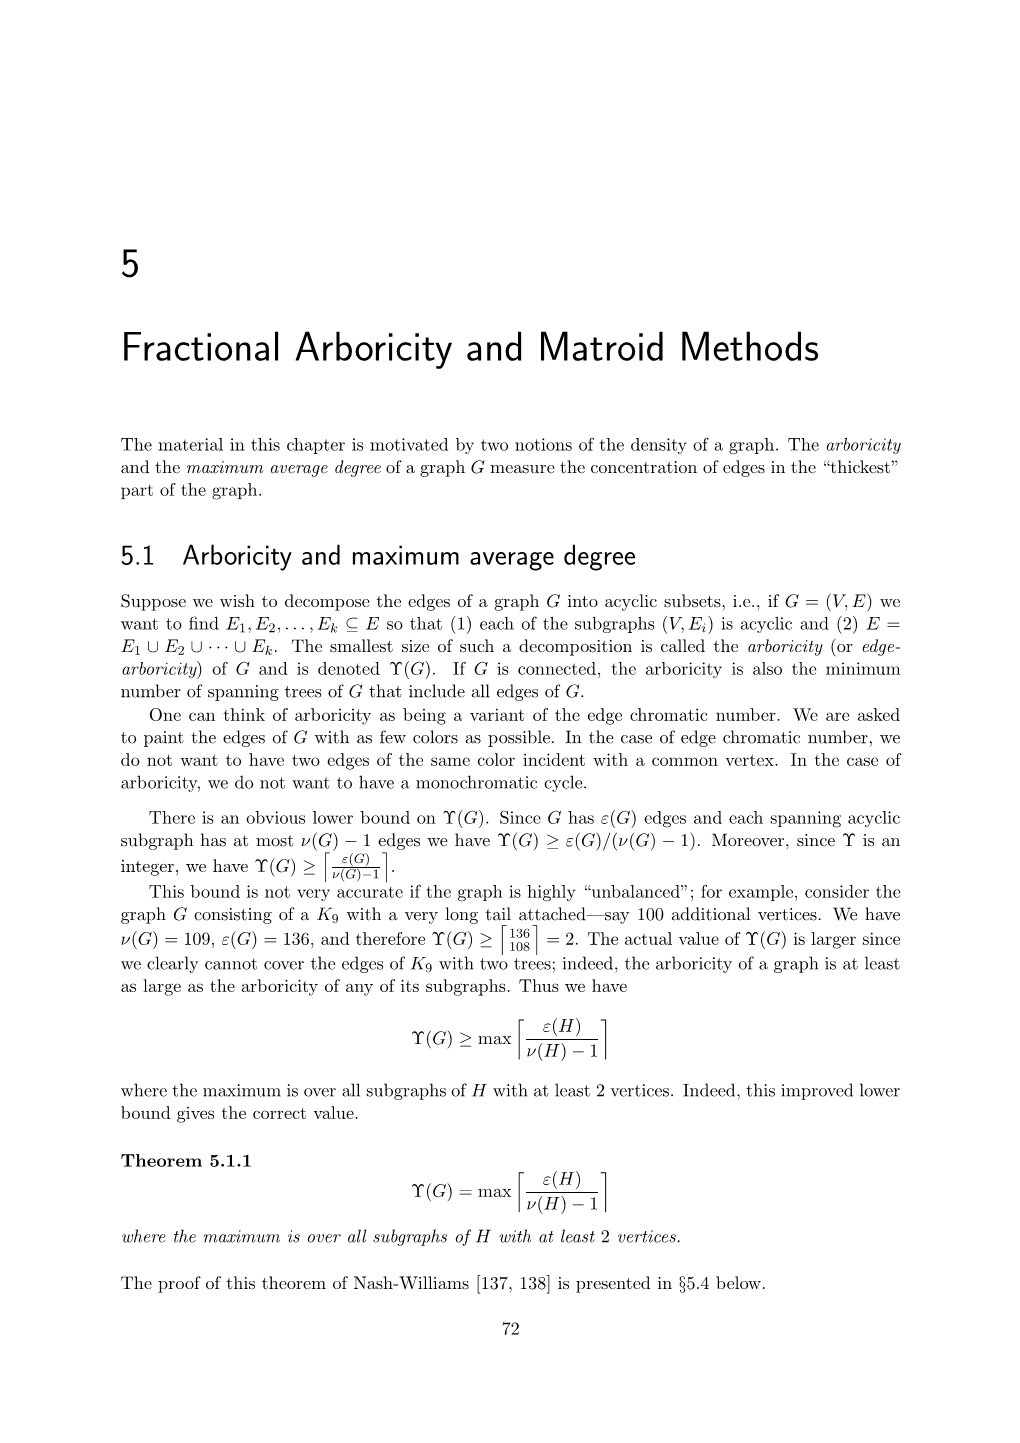 5 Fractional Arboricity and Matroid Methods